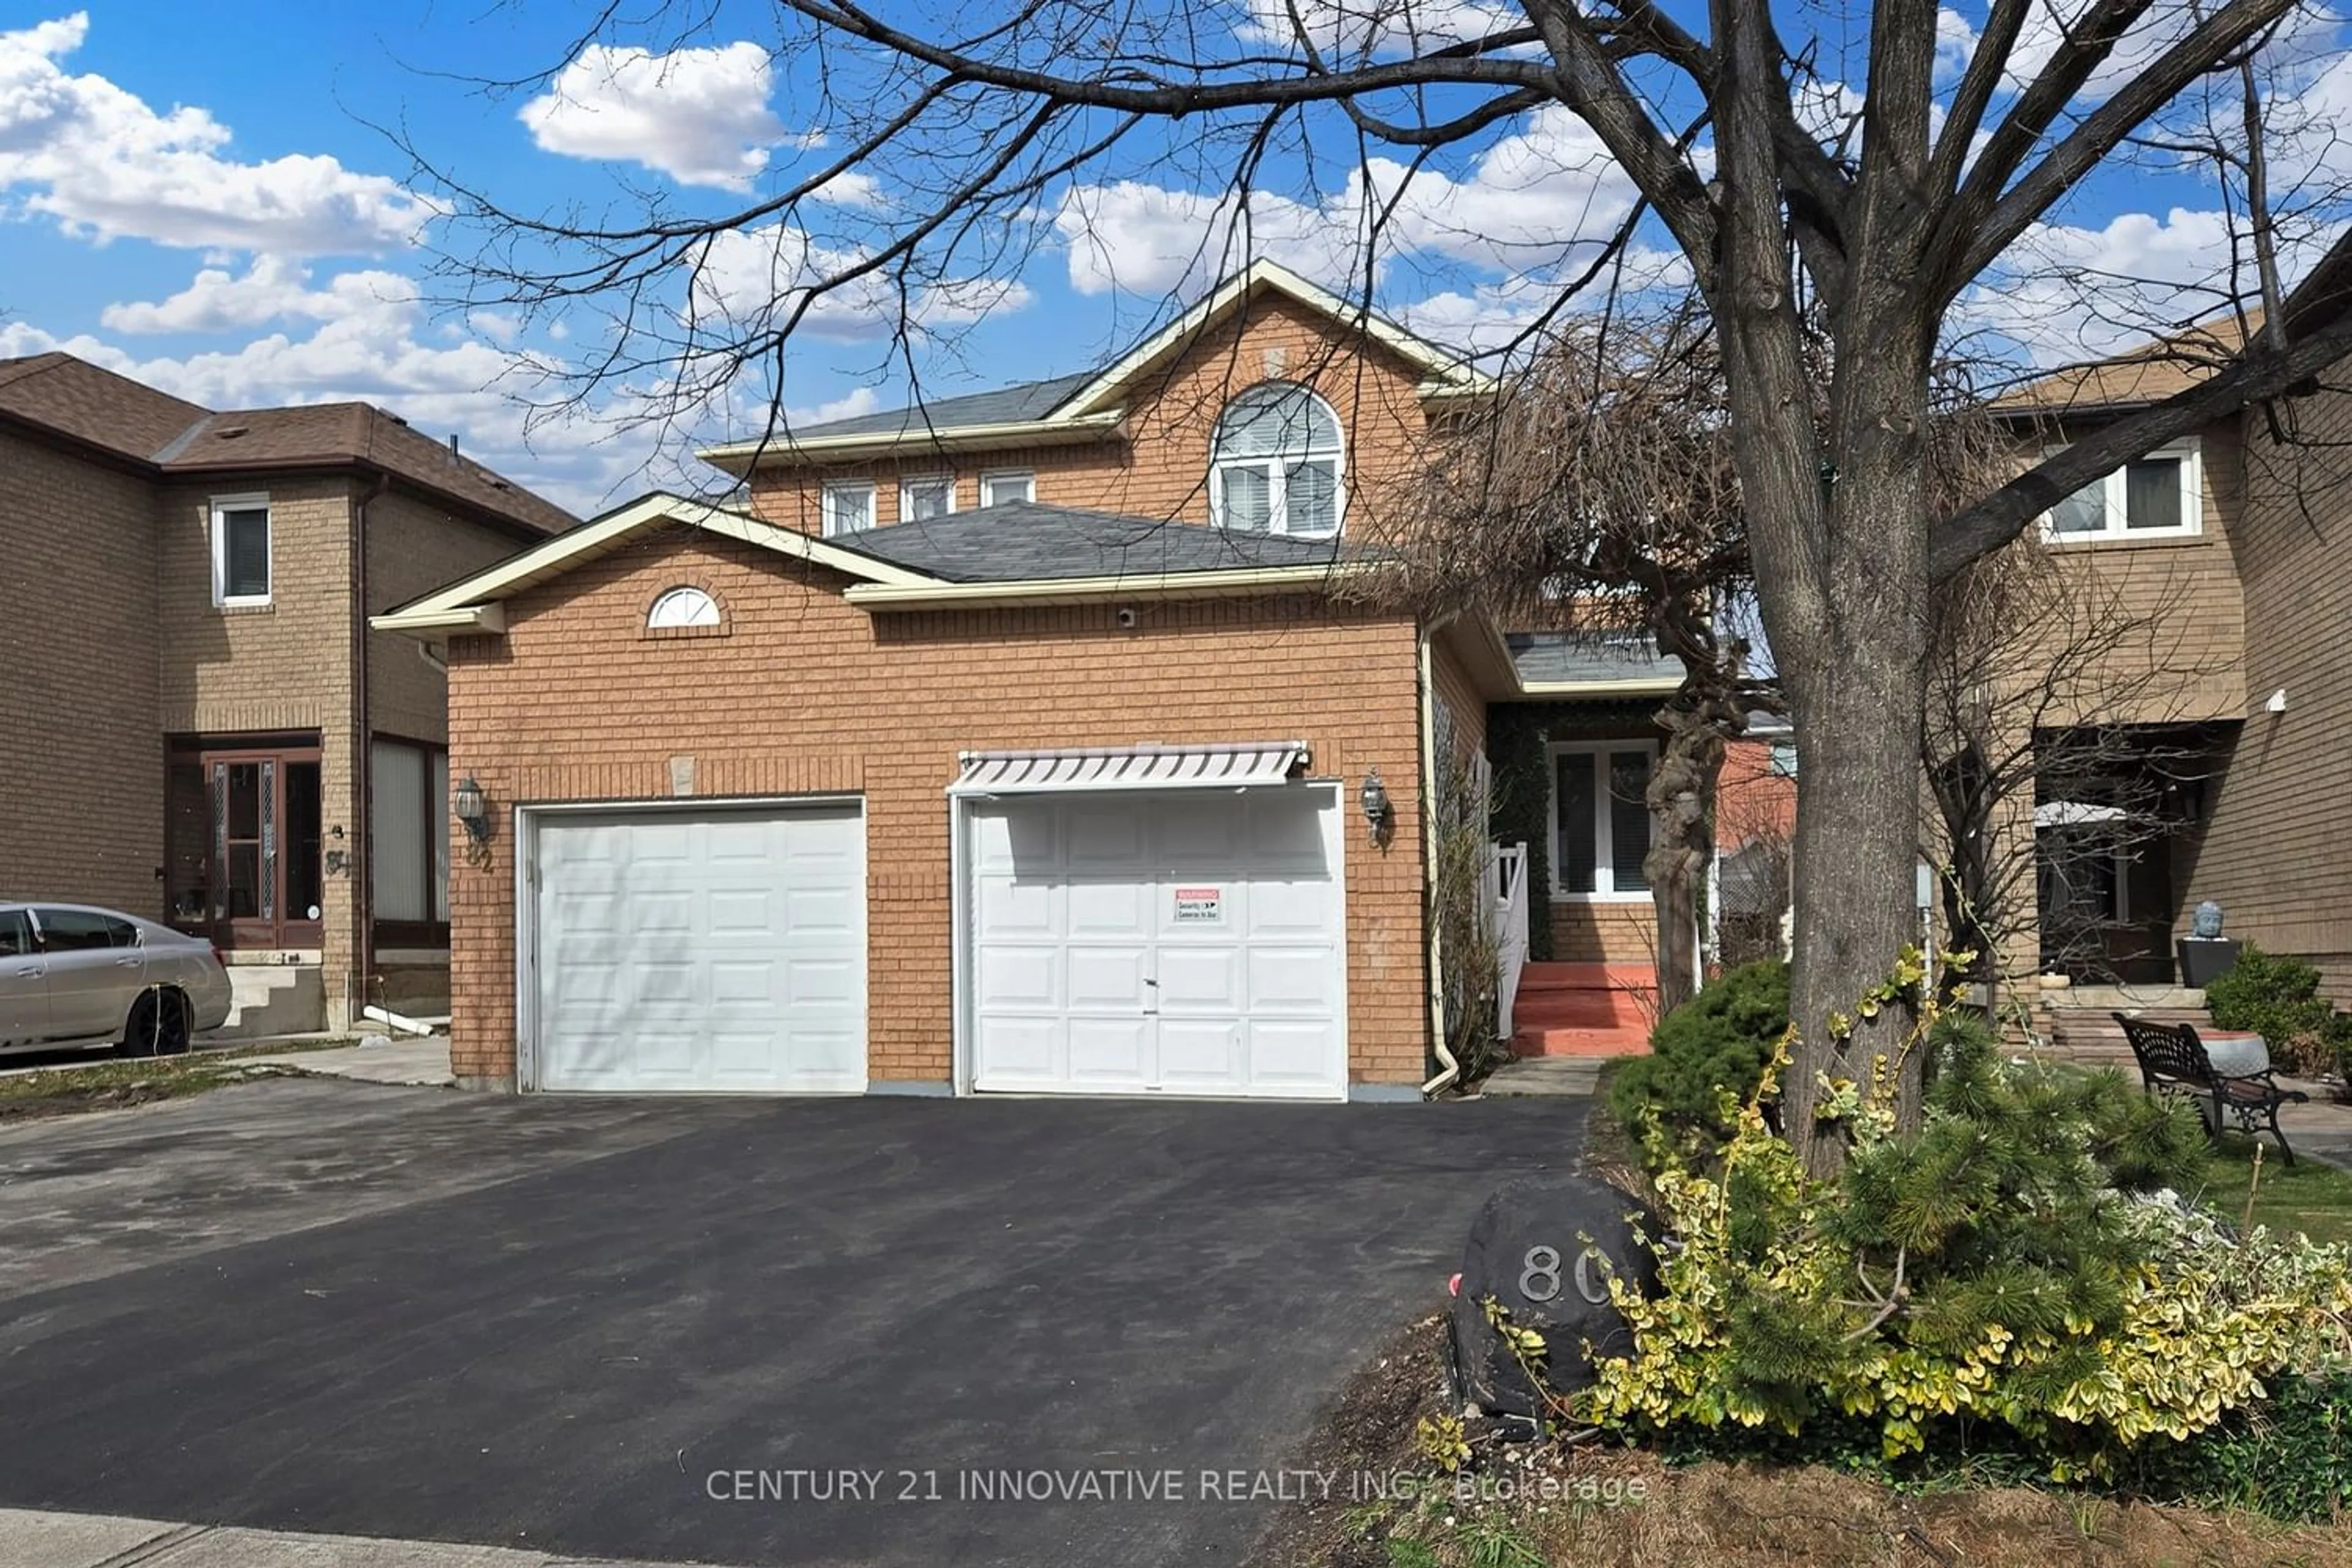 Home with brick exterior material for 80 Millstone Dr, Brampton Ontario L6Y 4P9